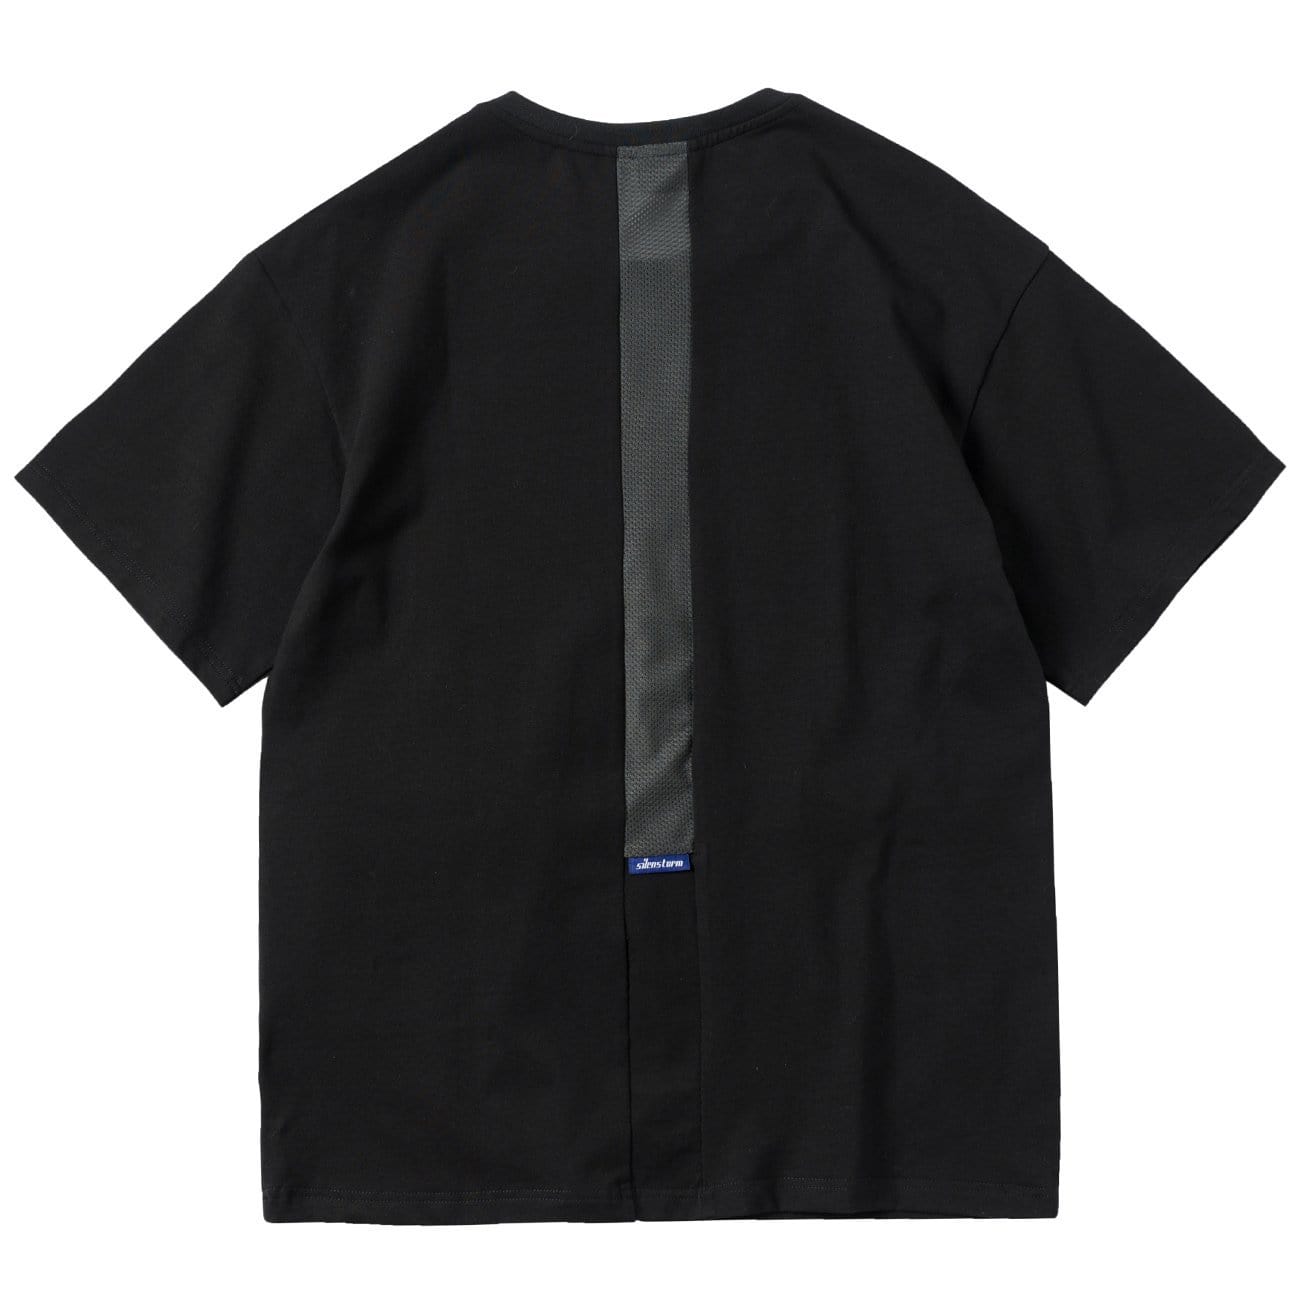 TO Functional Multi-Pocket Cotton Tee